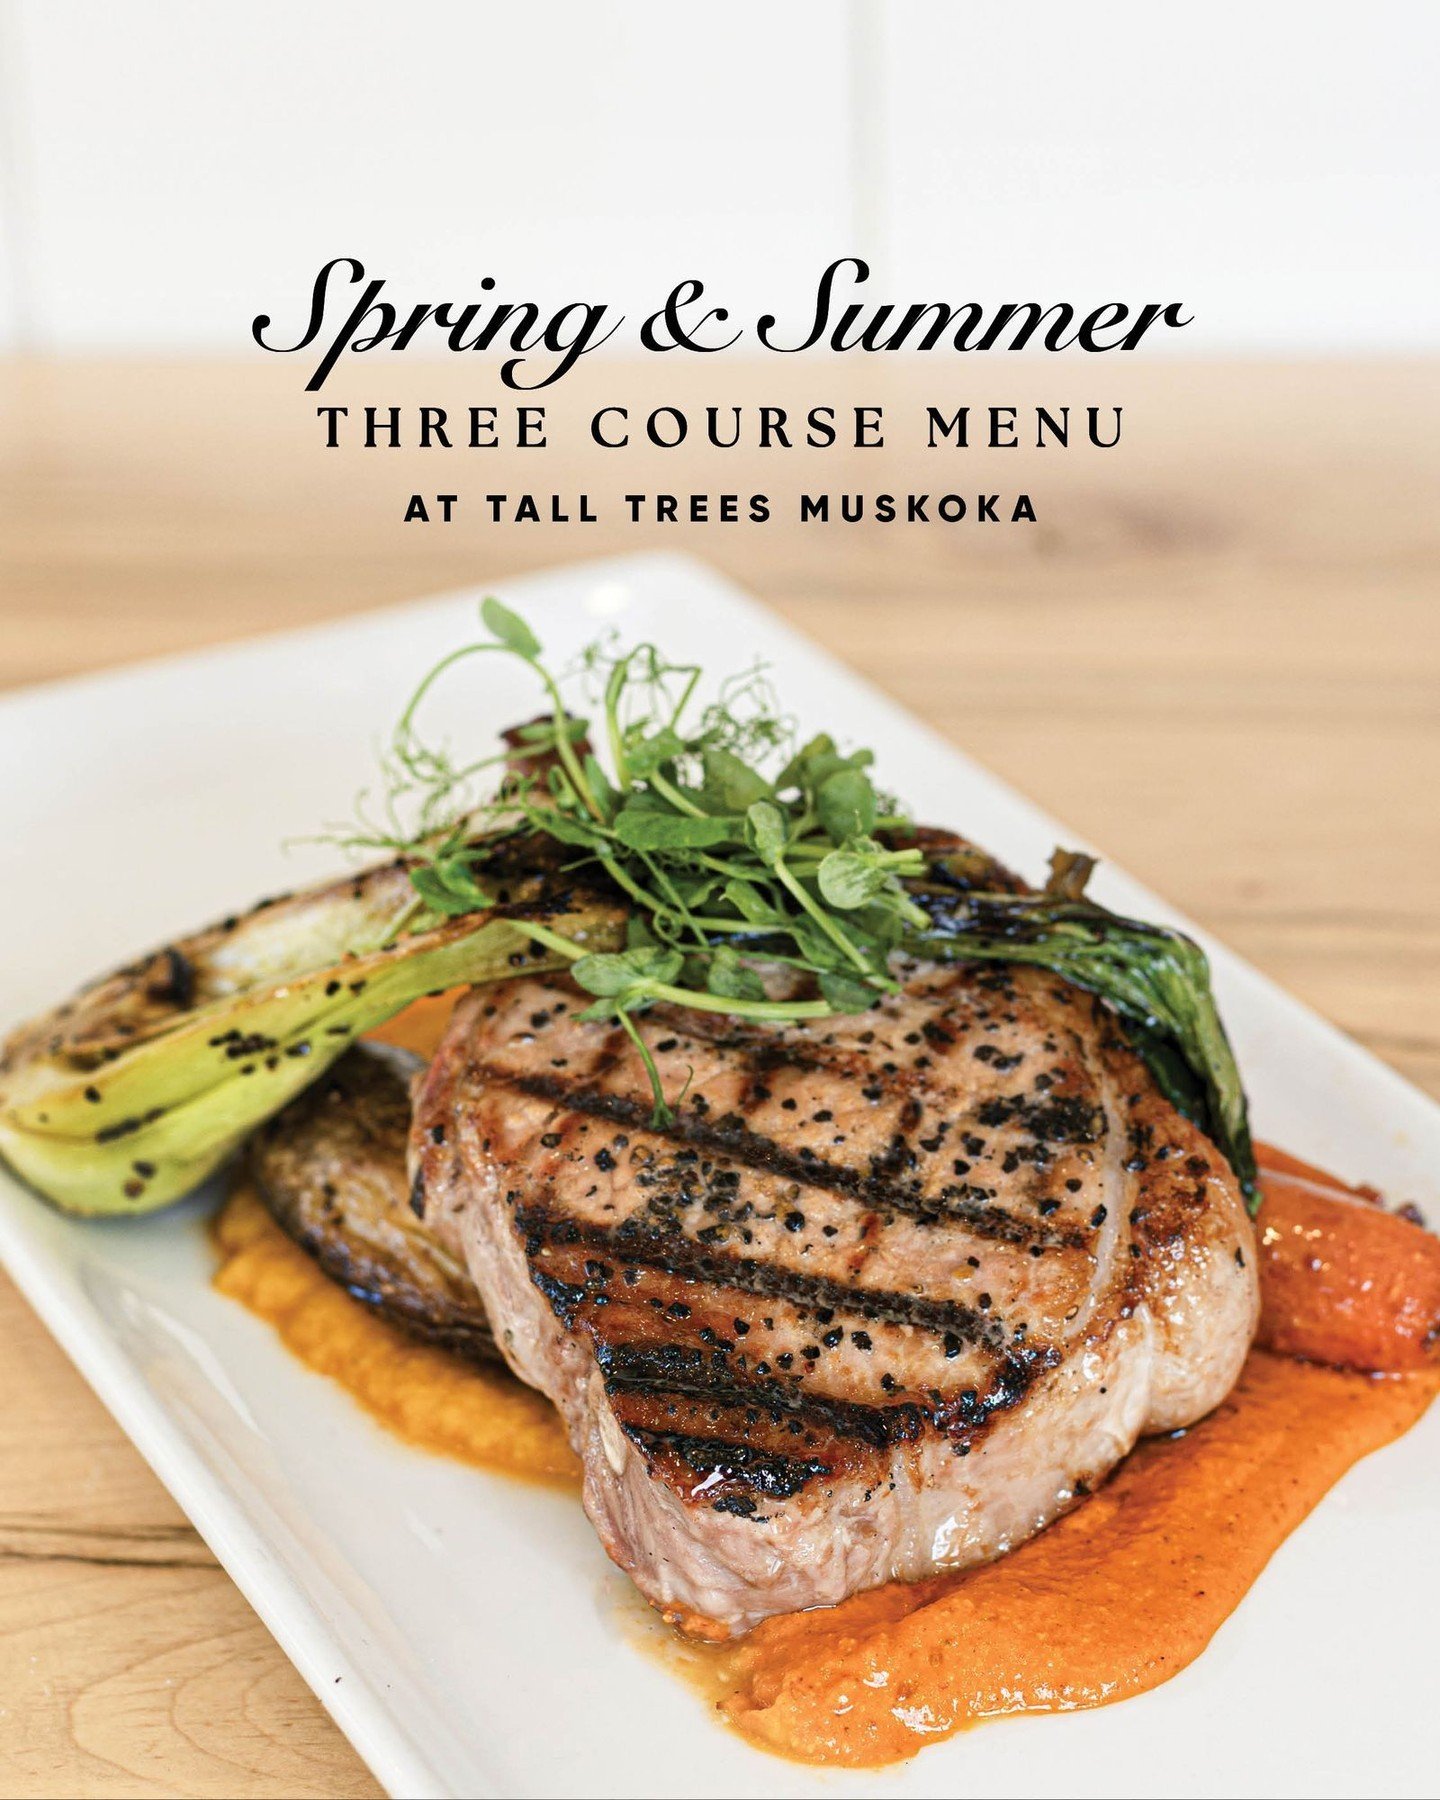 Dig into our new and delicious Apple Cider Grilled Pork Chop, served on a bed of savoury roasted fingerling potatoes and fresh seasonal vegetables drenched in a vibrant romesco sauce. 

Romesco sauce originates from the Catalan region of Spain and is